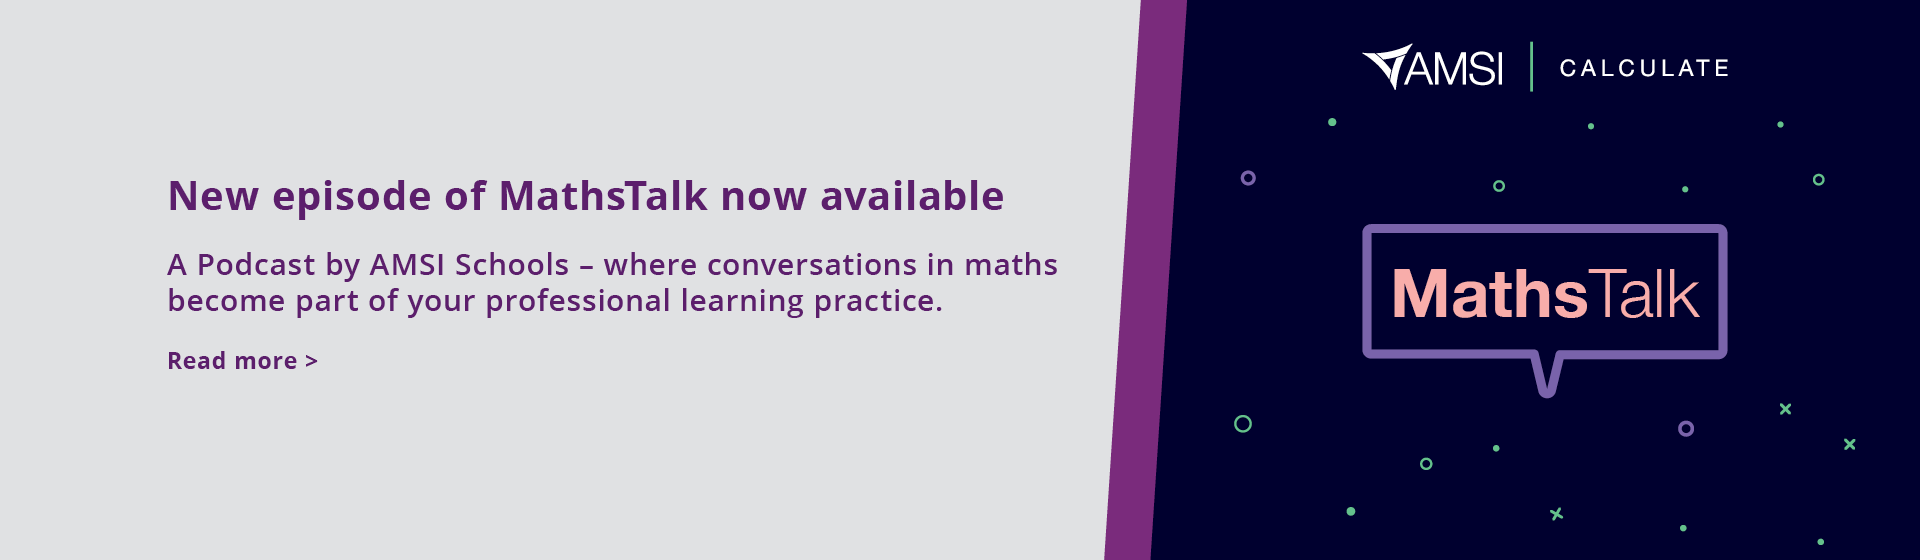 New episode of MathsTalk now available